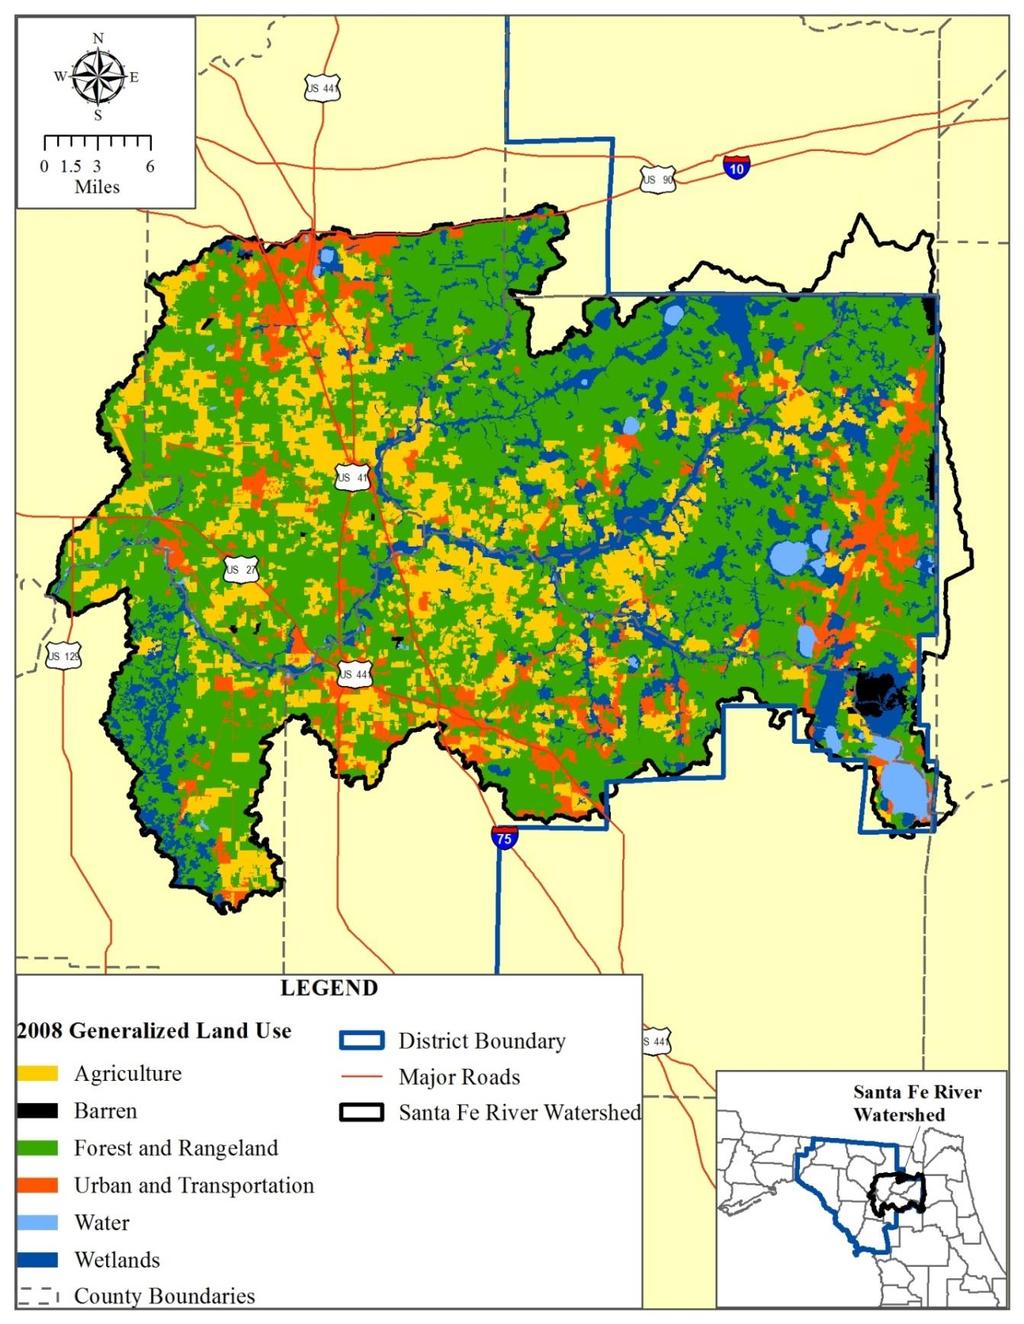 1 Source: SRWMD generalized Florida Land Use, Land Cover Classification System, 2008 Figure